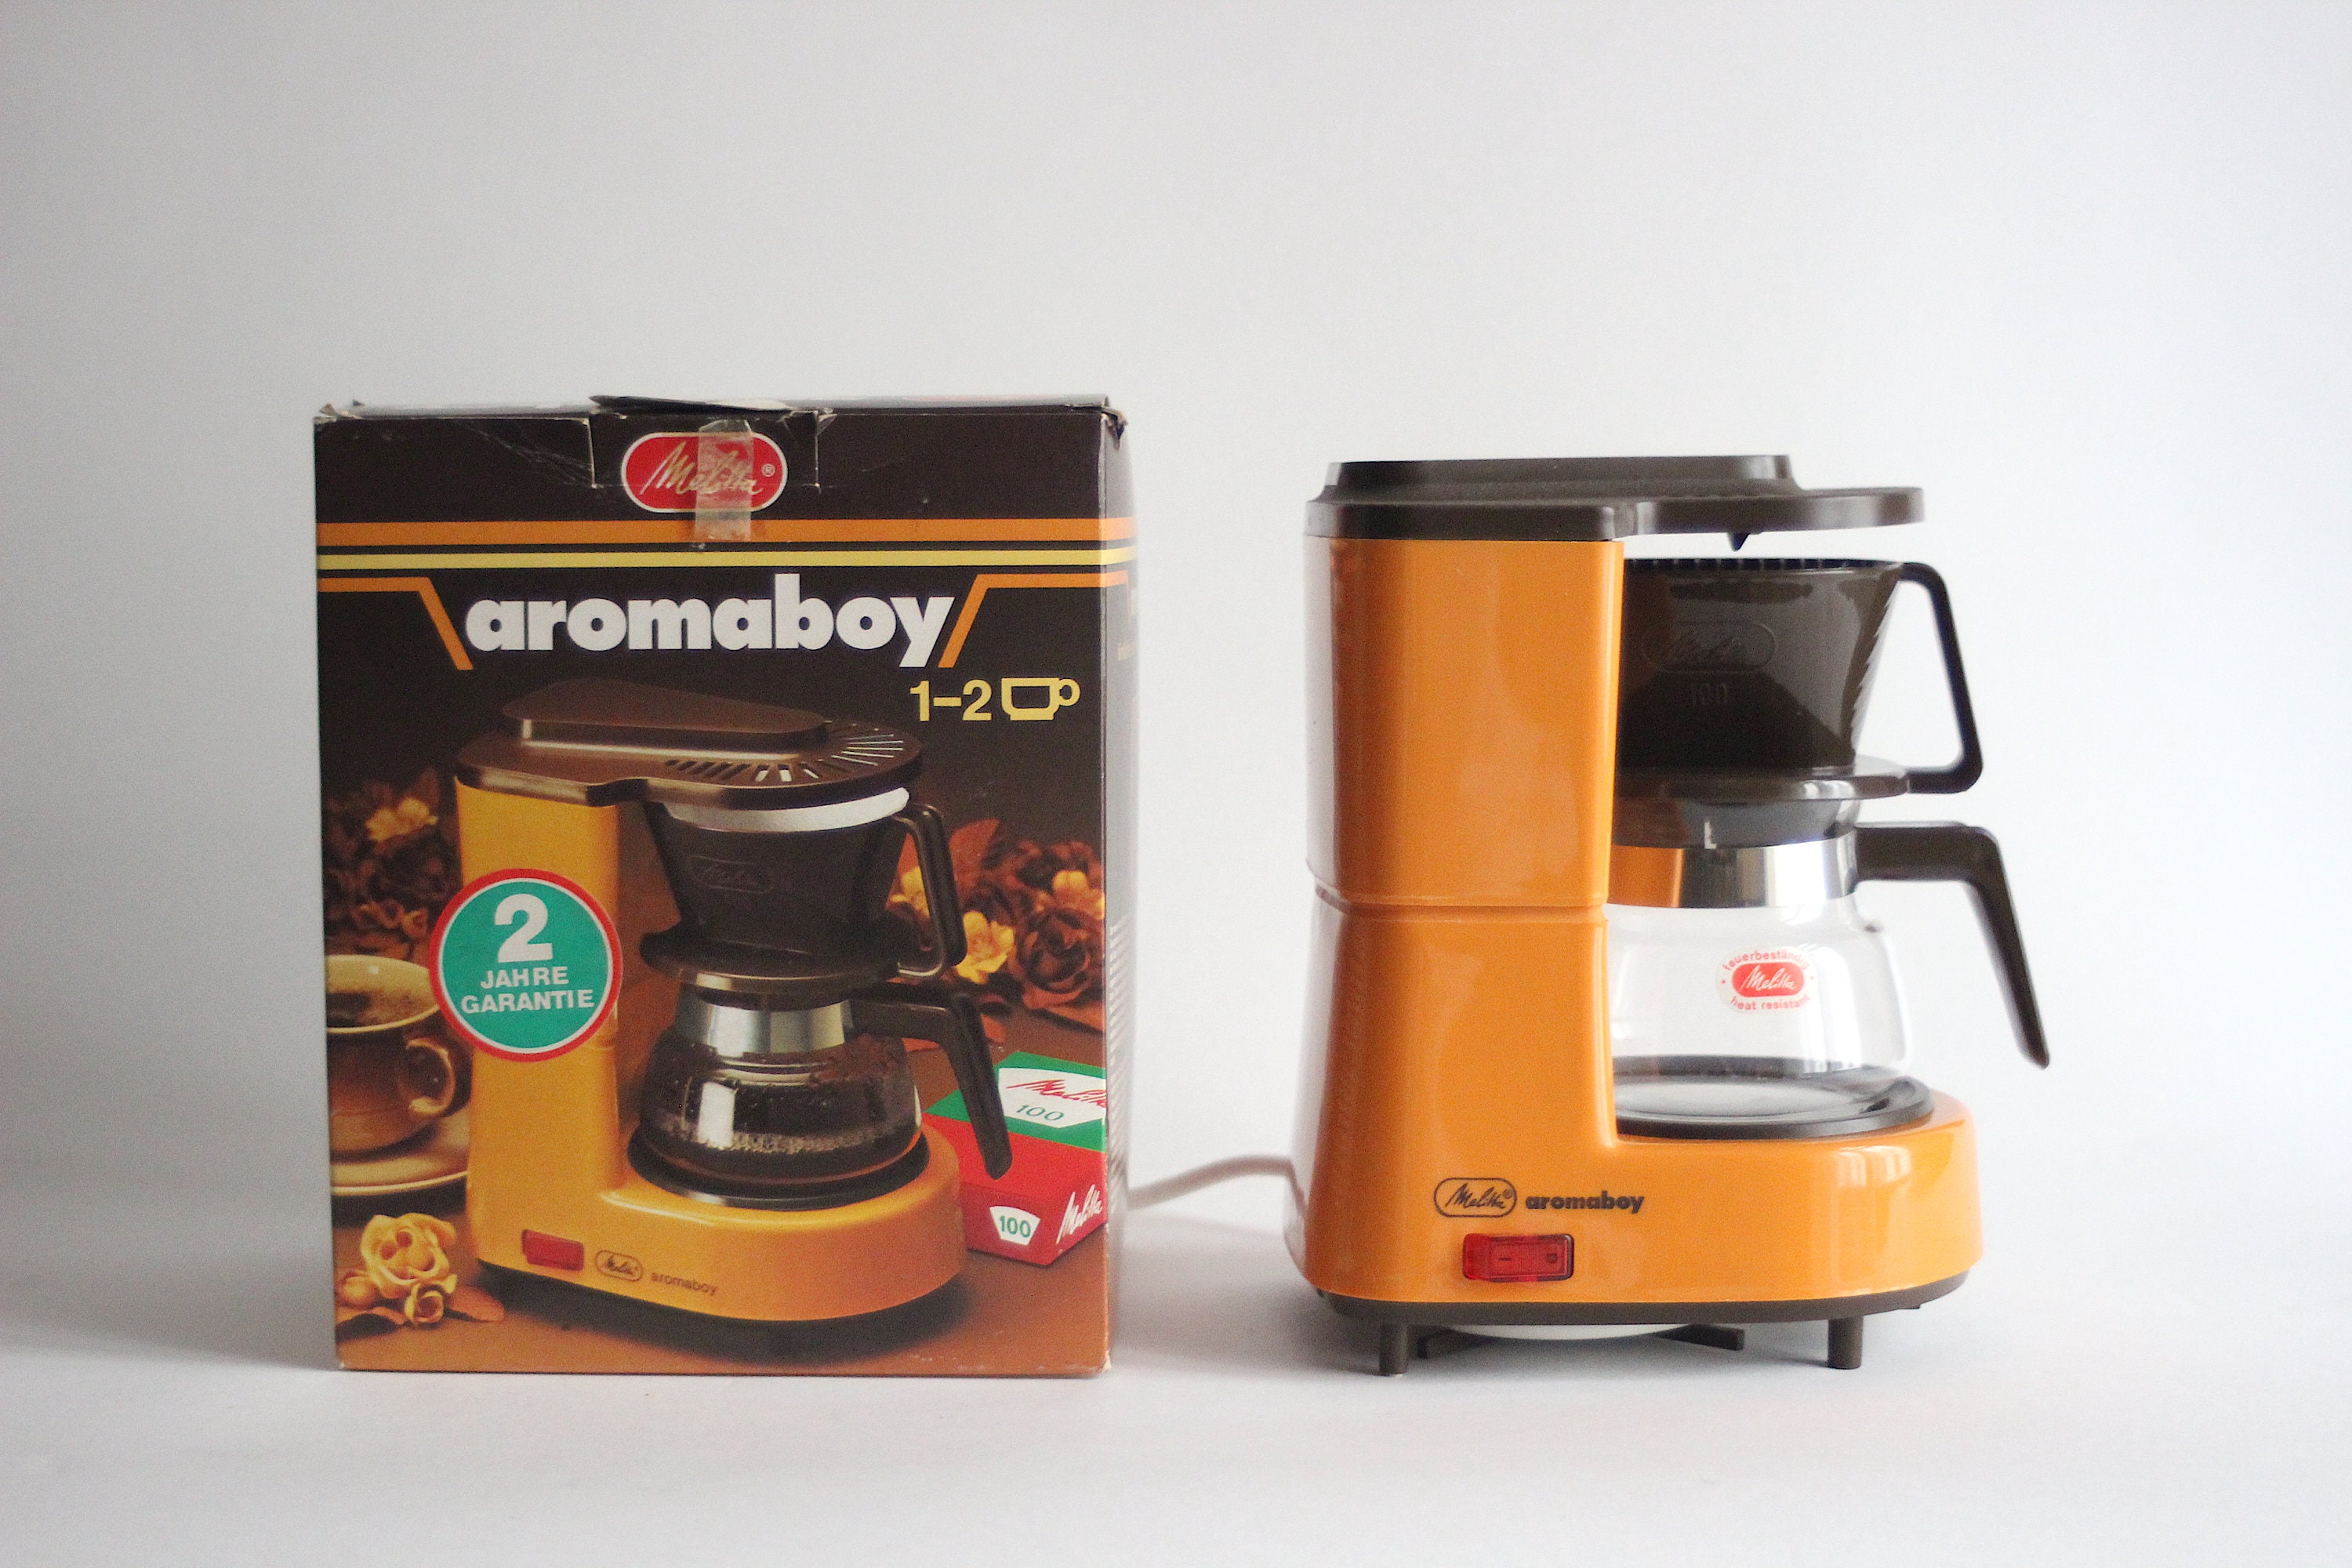 Melitta AROMABOY Small Orange Filter Coffee Maker for 1-2 Cups